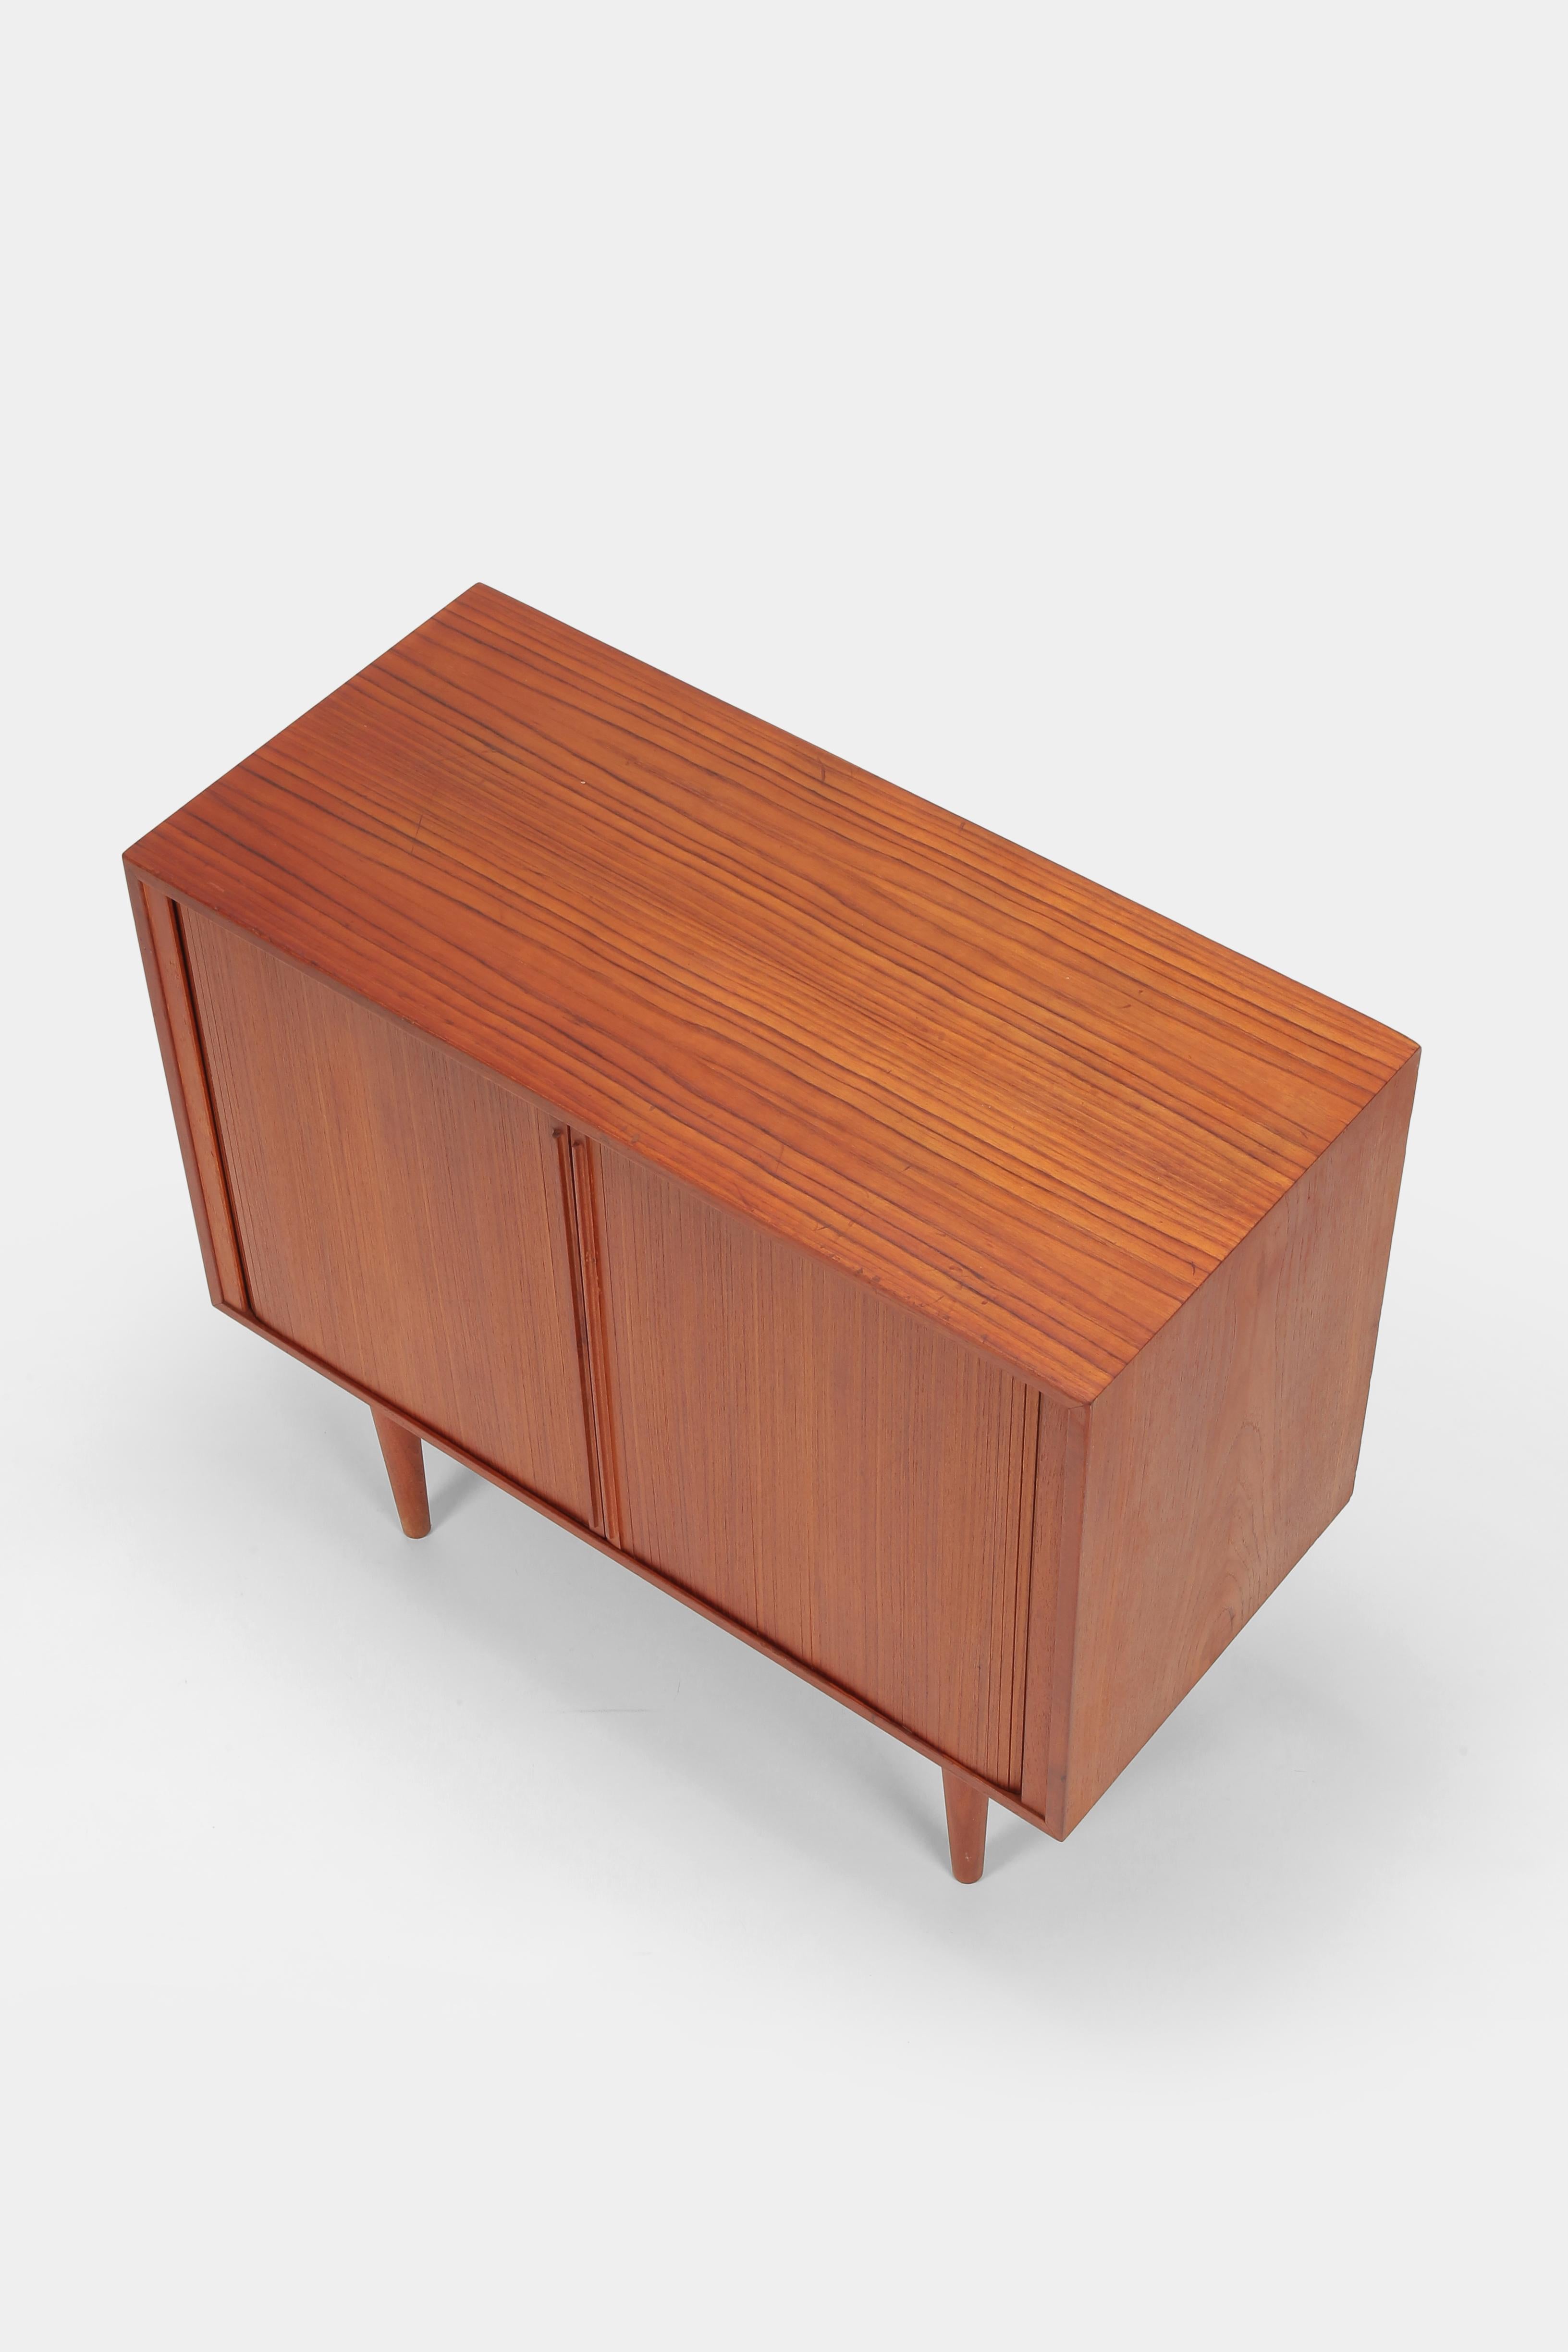 Kai Kristiansen chest of drawers made by FM Moebler in Denmark in the 1960s. Elaborately crafted tambour doors in solid teak, teak veneer and maple interior. Beautiful, practical piece of furniture, meticulously finished with slight signs of